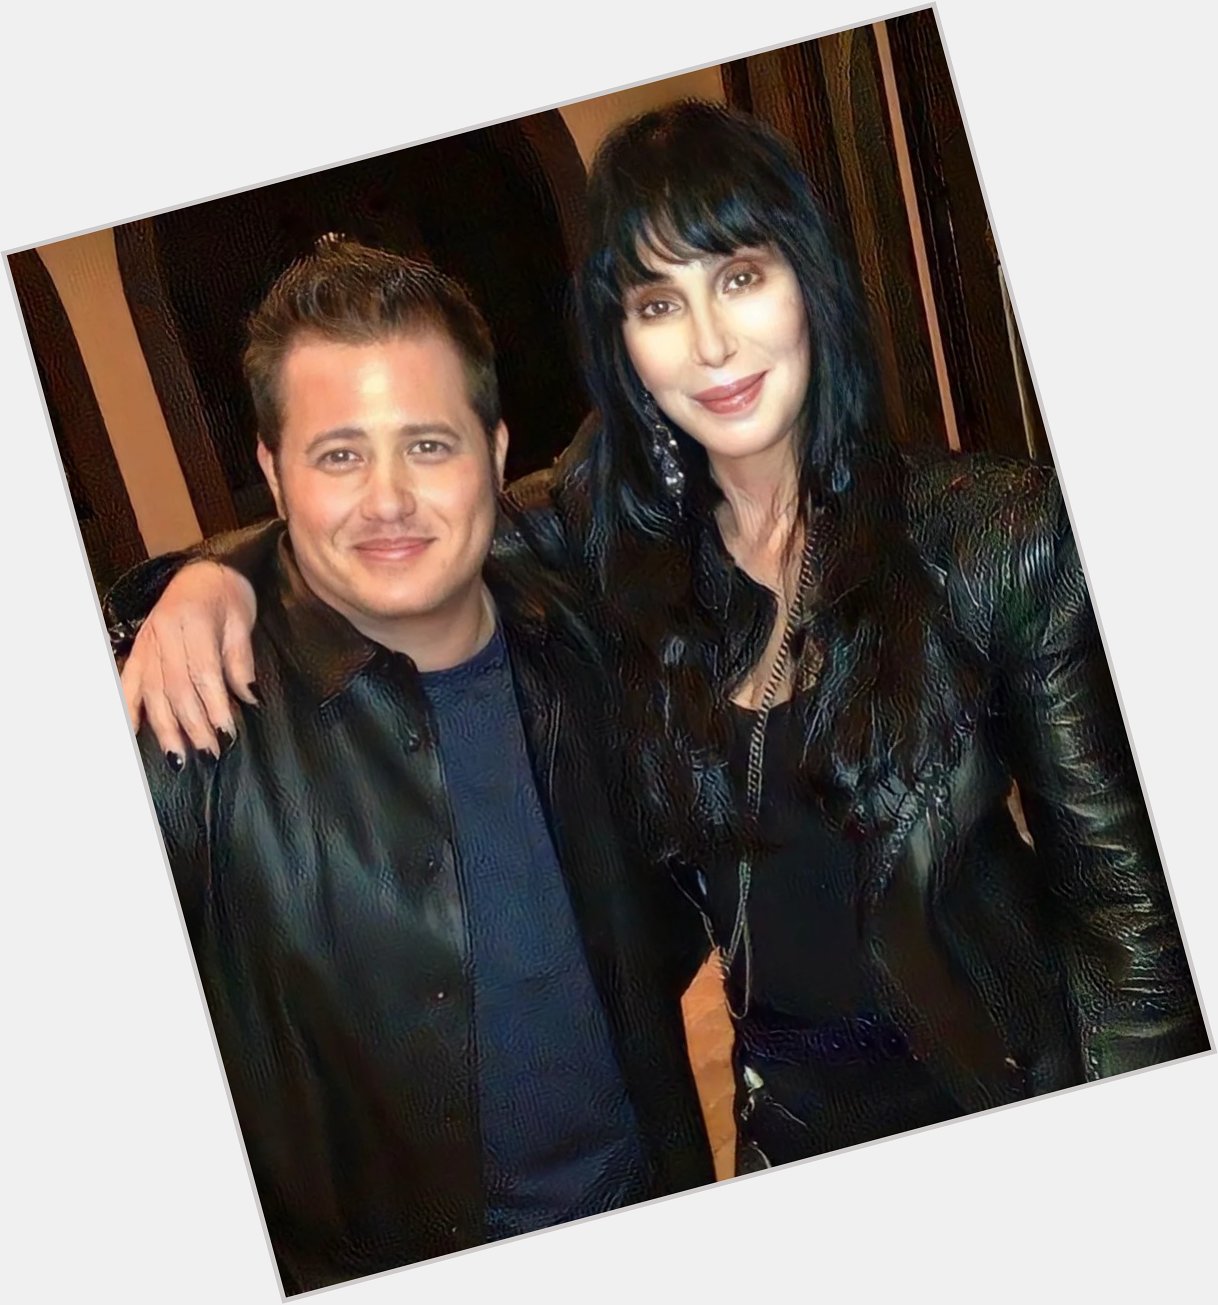   | Happy Birthday to eldest son Chaz Bono, who is turning 54 today. 